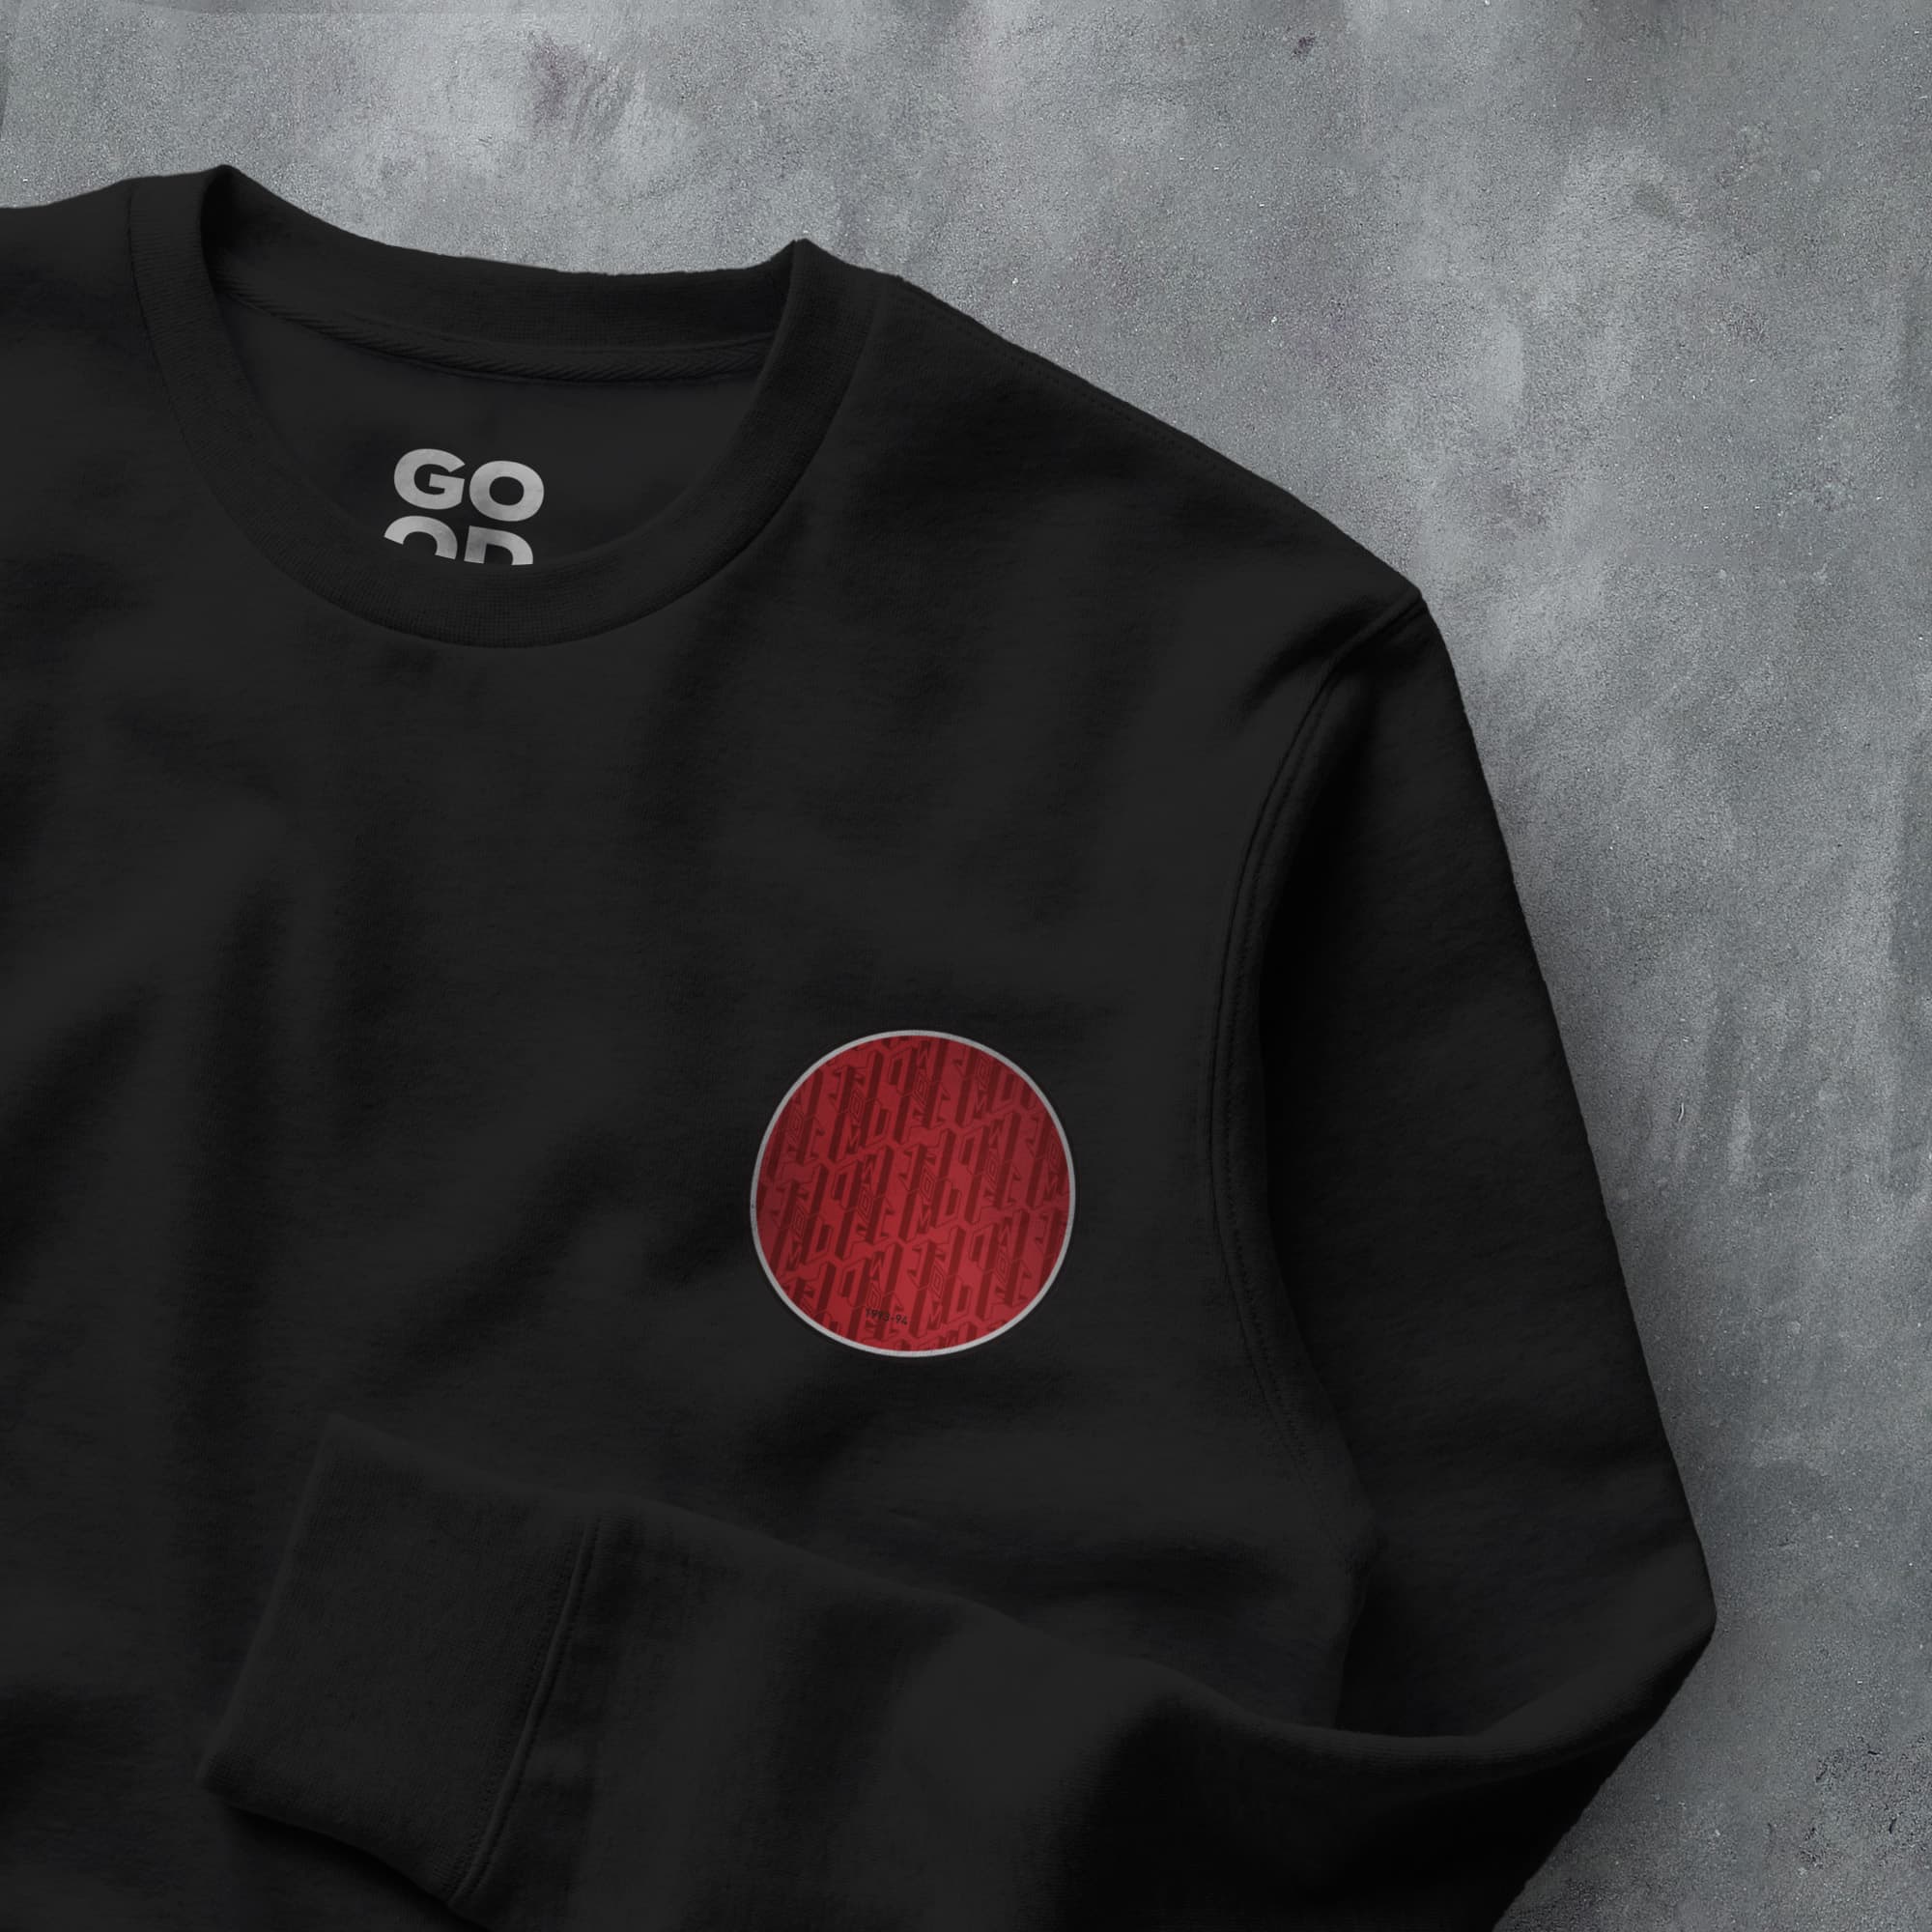 a black sweatshirt with a red circle on it